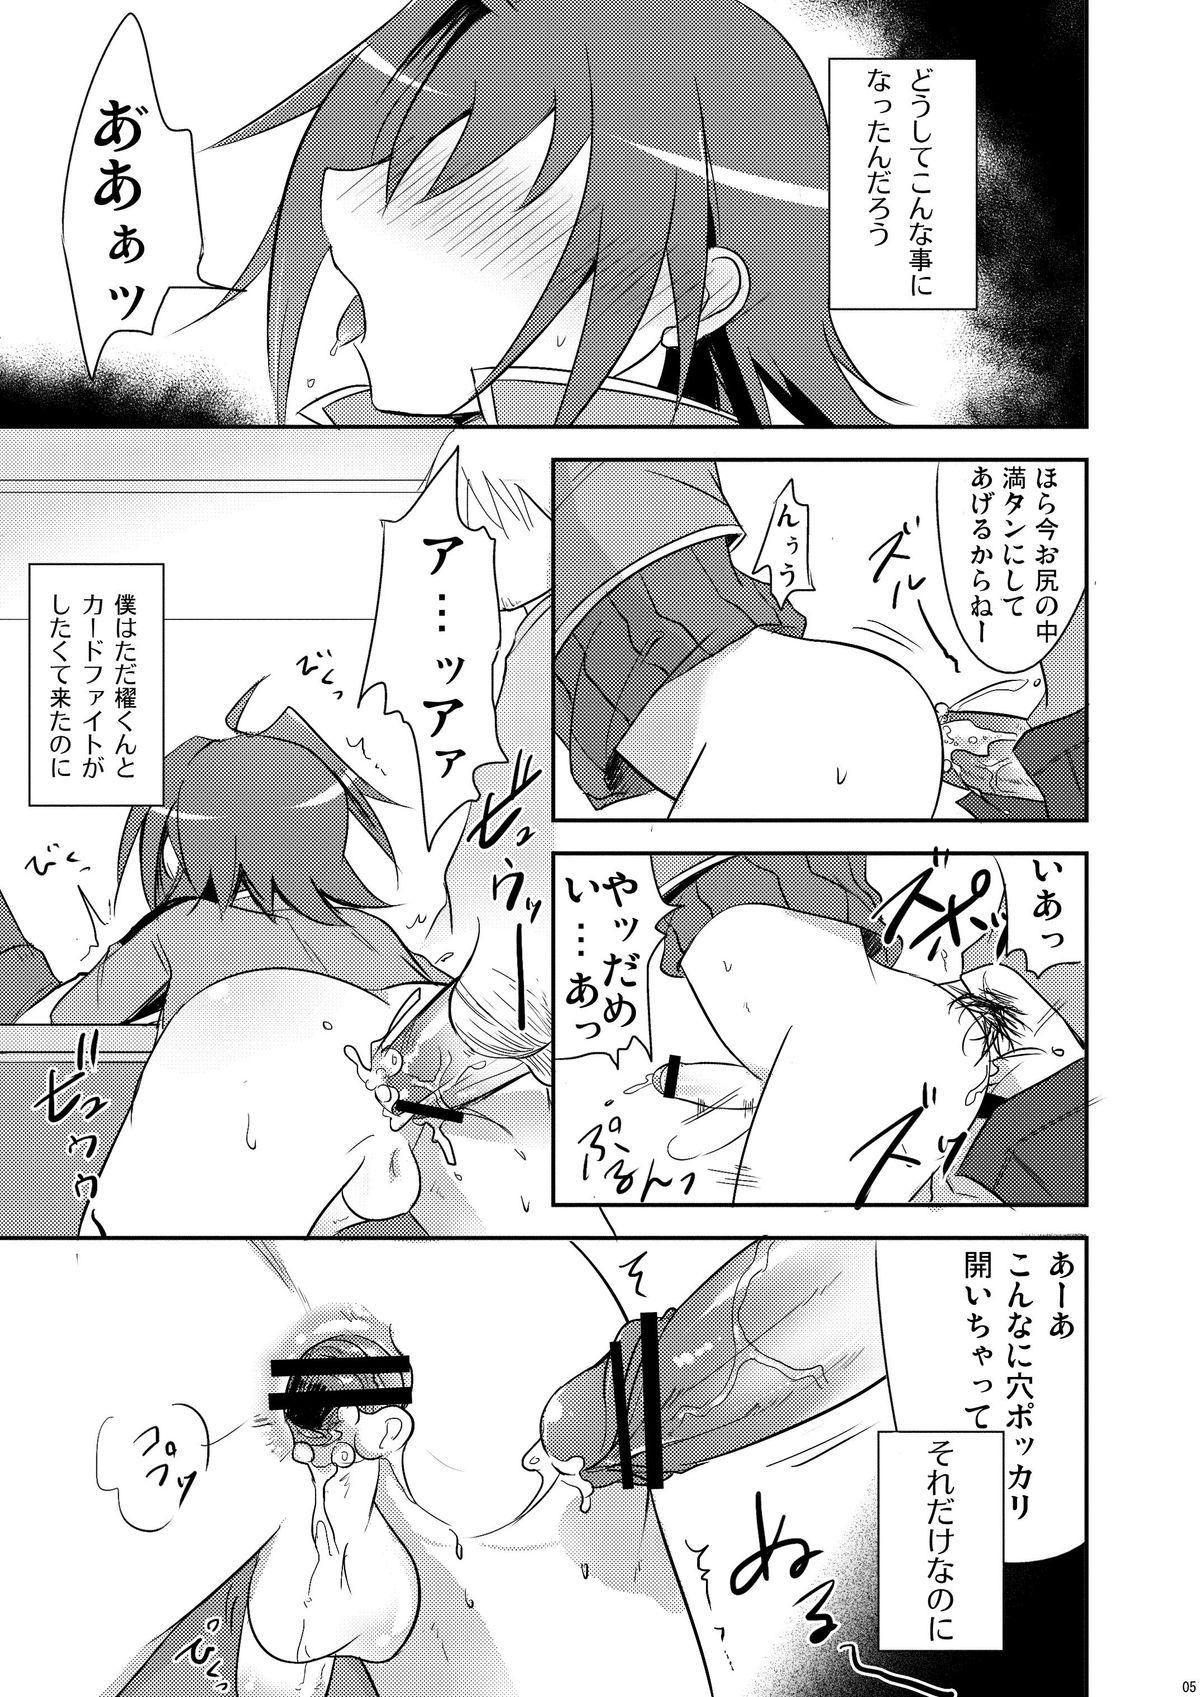 Mature NTR Image - Cardfight vanguard Cougars - Page 4